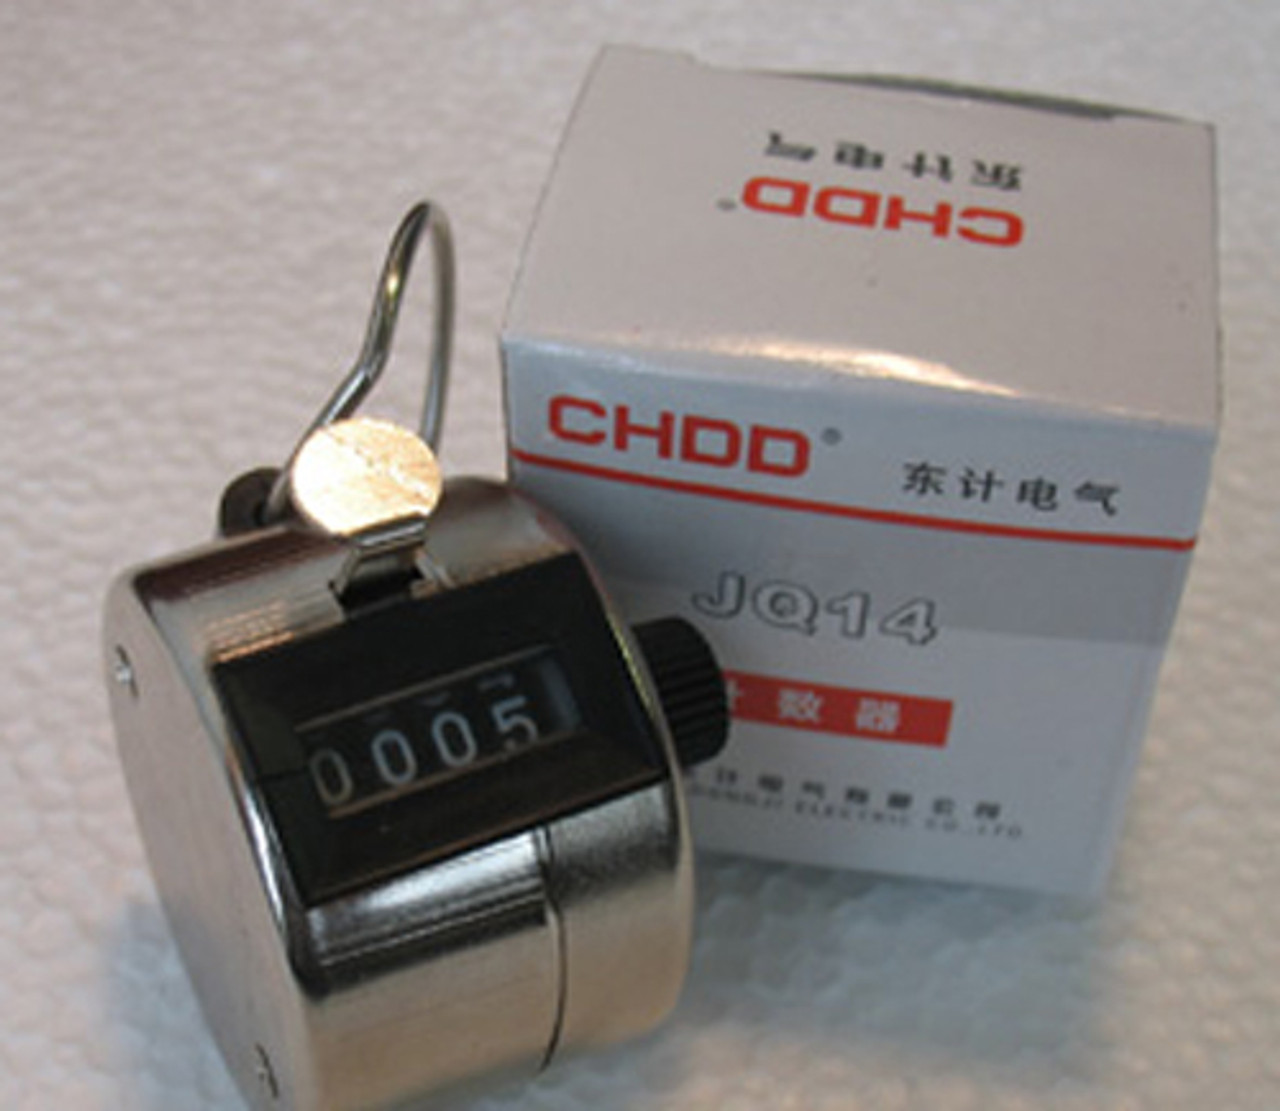 JQ14 Mechanical Tally Counter with Box